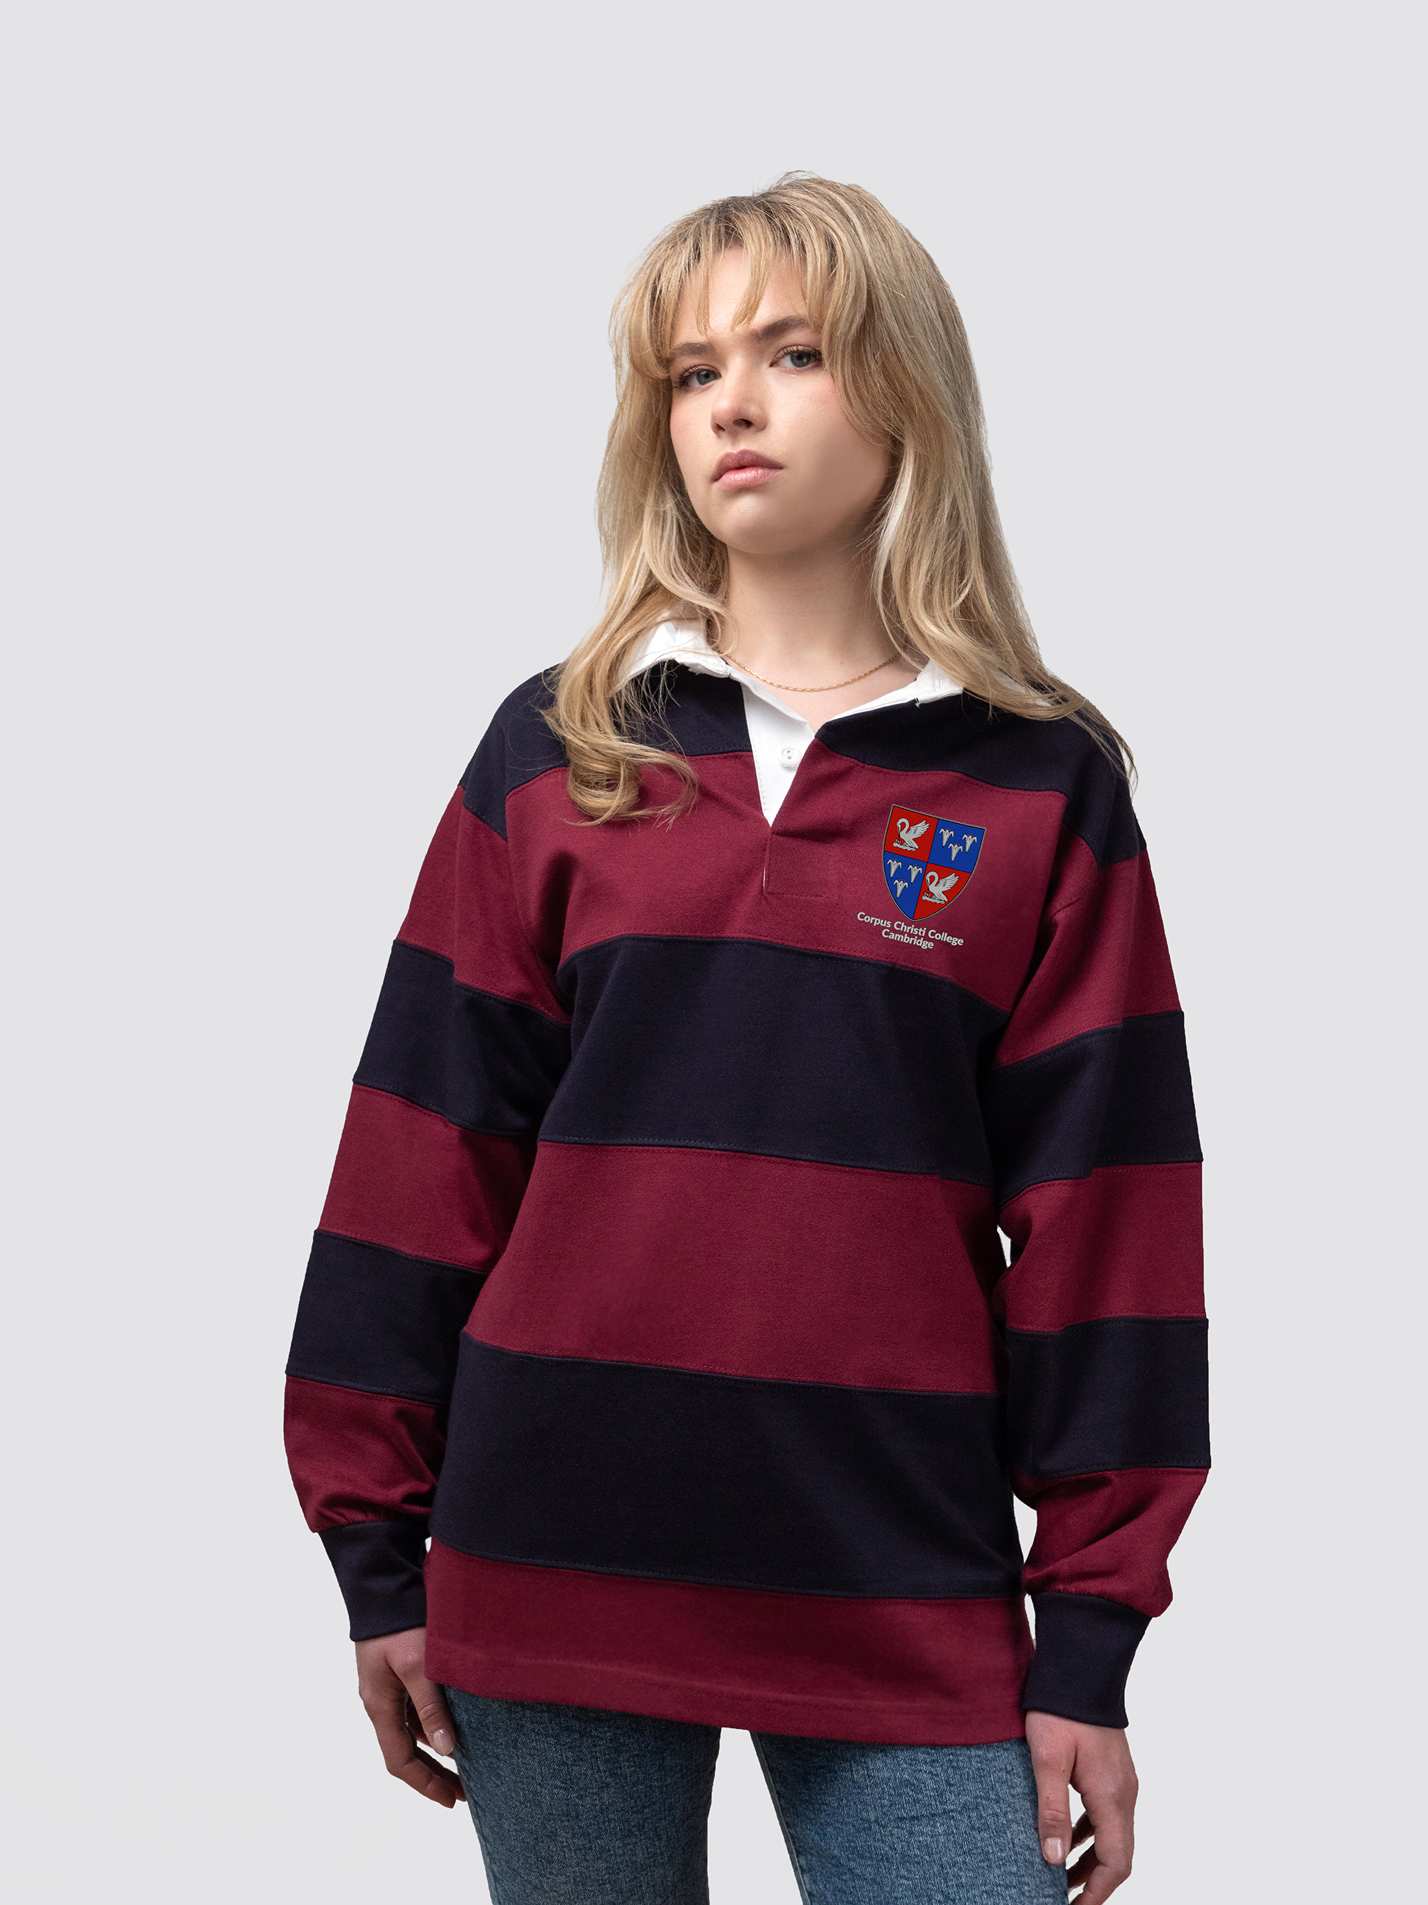 Corpus Christi College rugby shirt, with burgundy and navy stripes